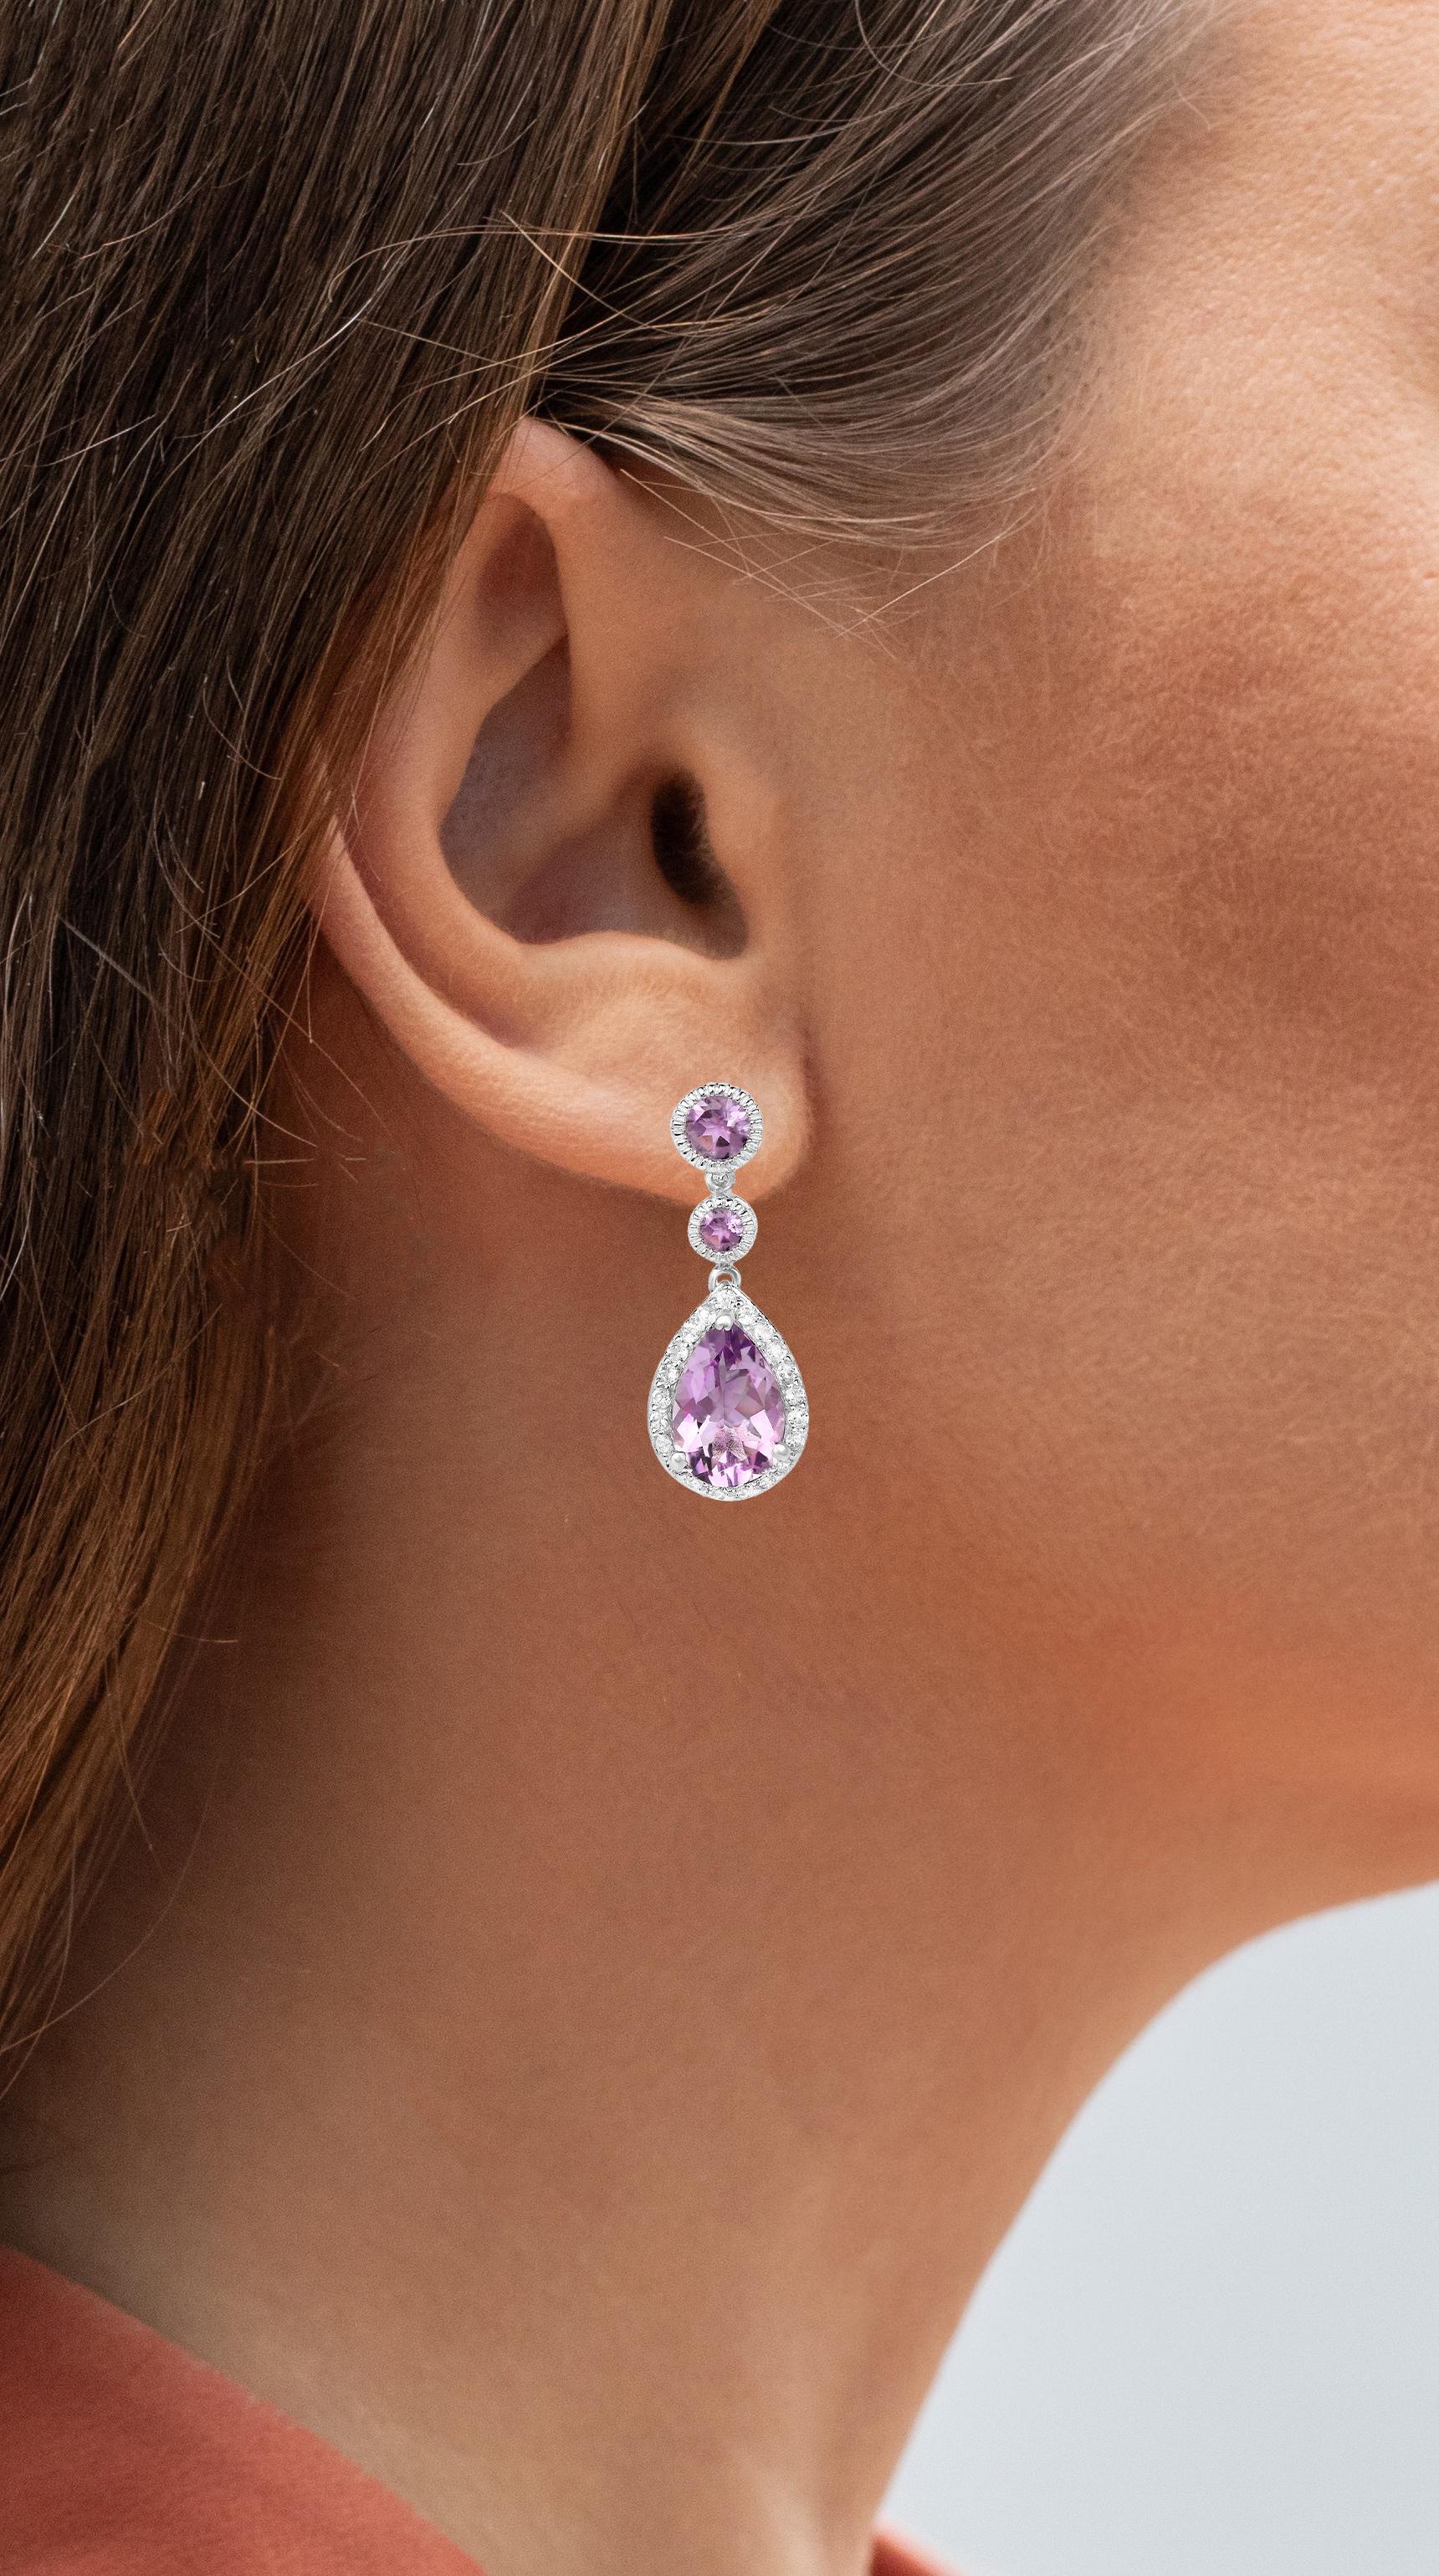 It comes with the Gemological Appraisal by GIA GG/AJP
All Gemstones are Natural
6 Pink Amethysts = 6.32 Carats
42 Round White Topazes = 0.84 Carats
Metal: Rhodium Plated Sterling Silver
Dimensions: 29 x 12 mm

